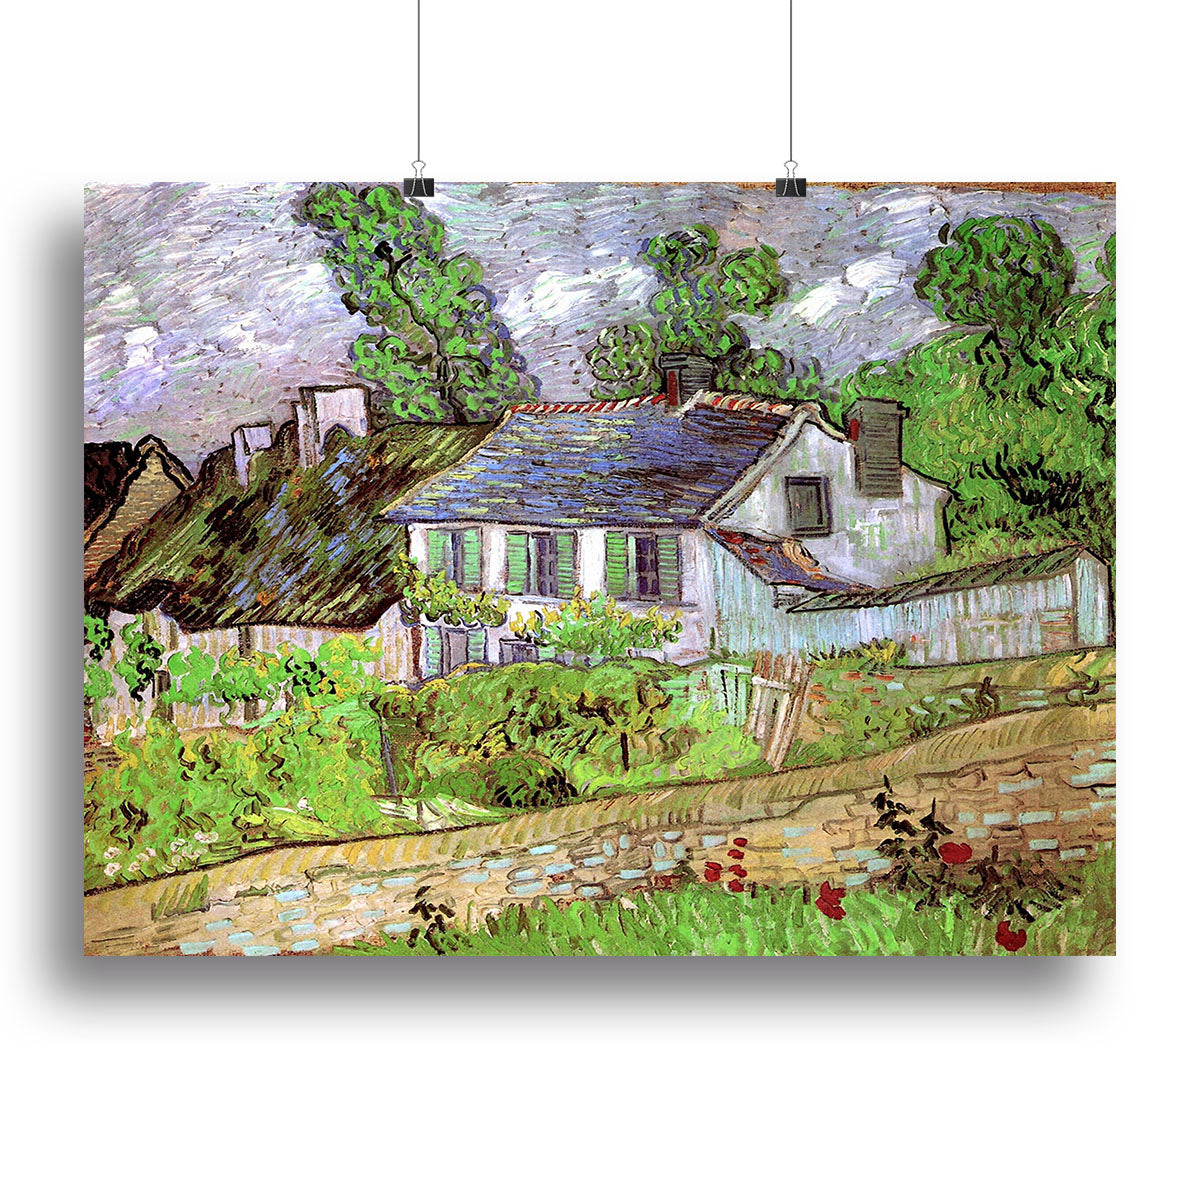 Houses in Auvers 2 by Van Gogh Canvas Print or Poster - Canvas Art Rocks - 2